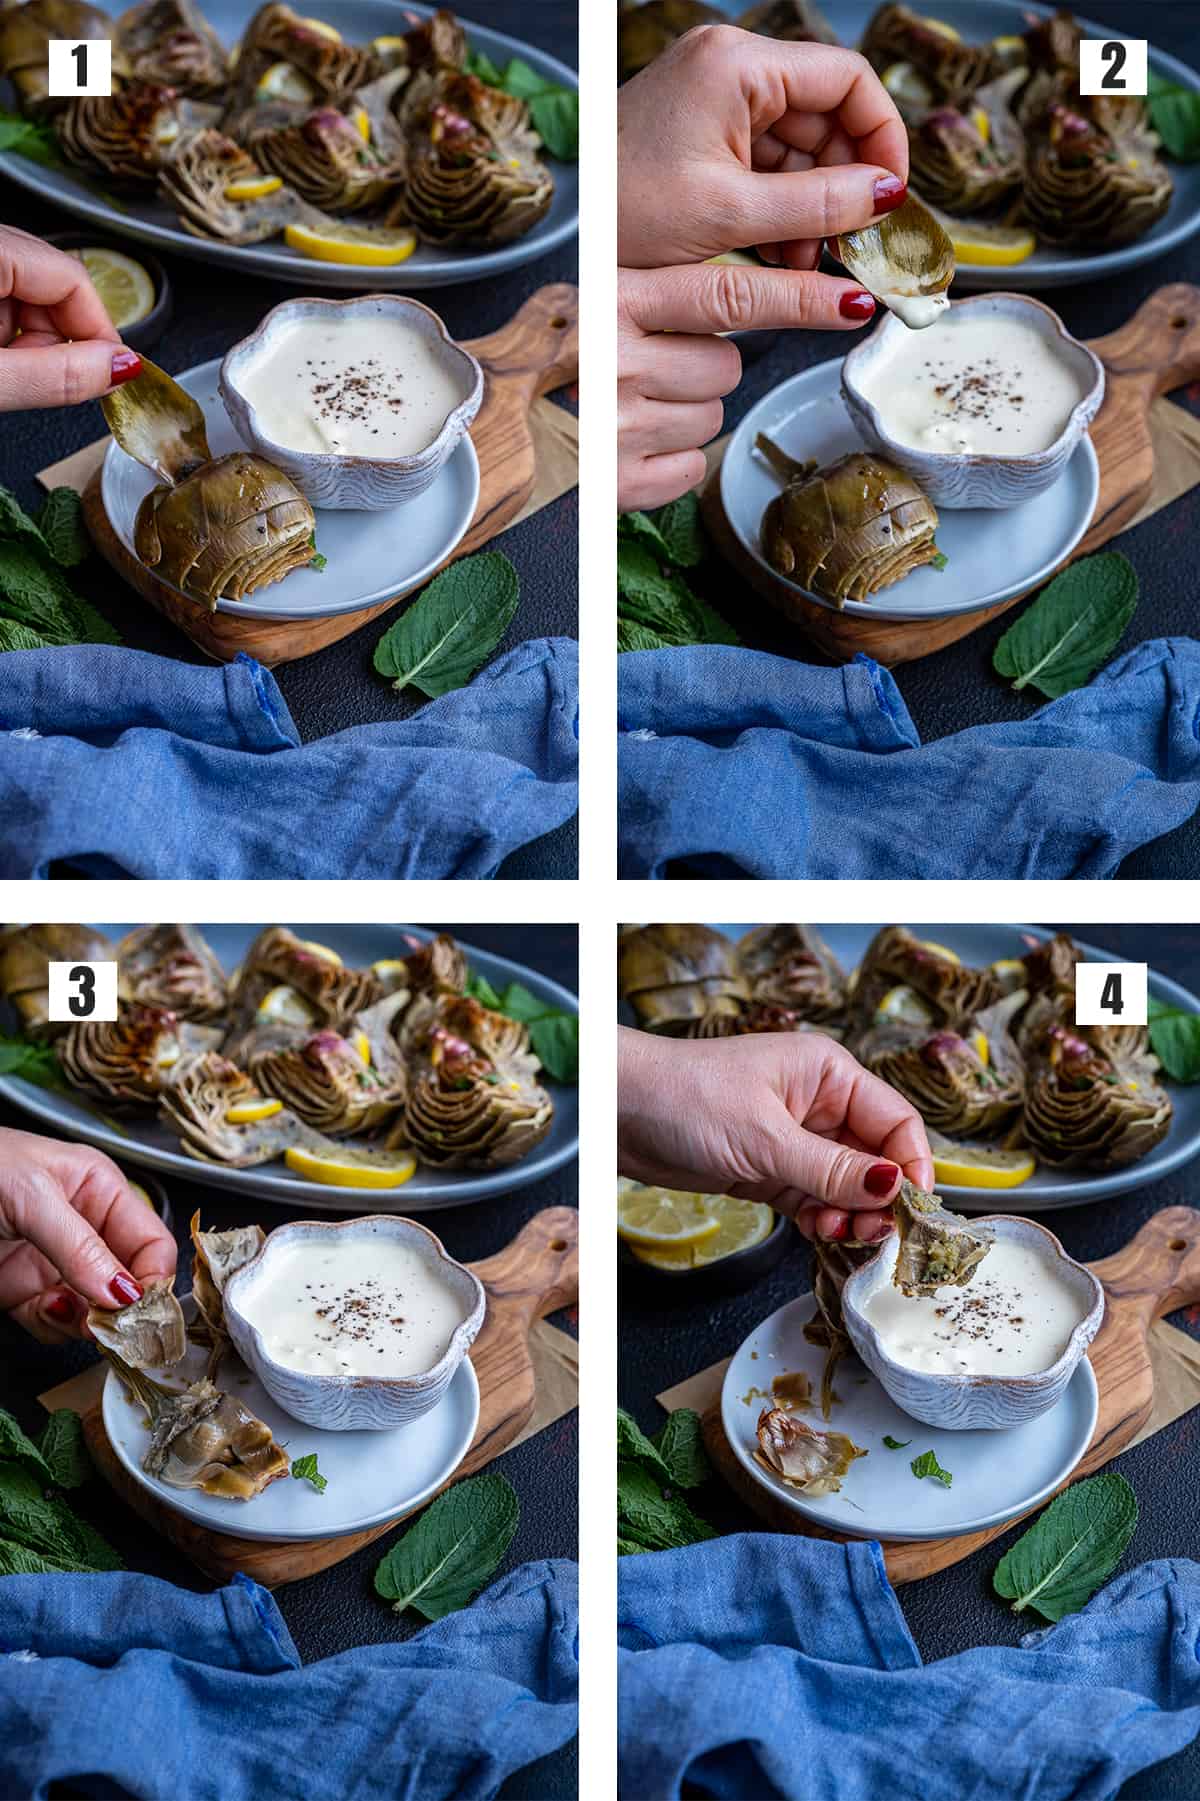 A collage of four pictures showing how to eat a roasted artichoke.